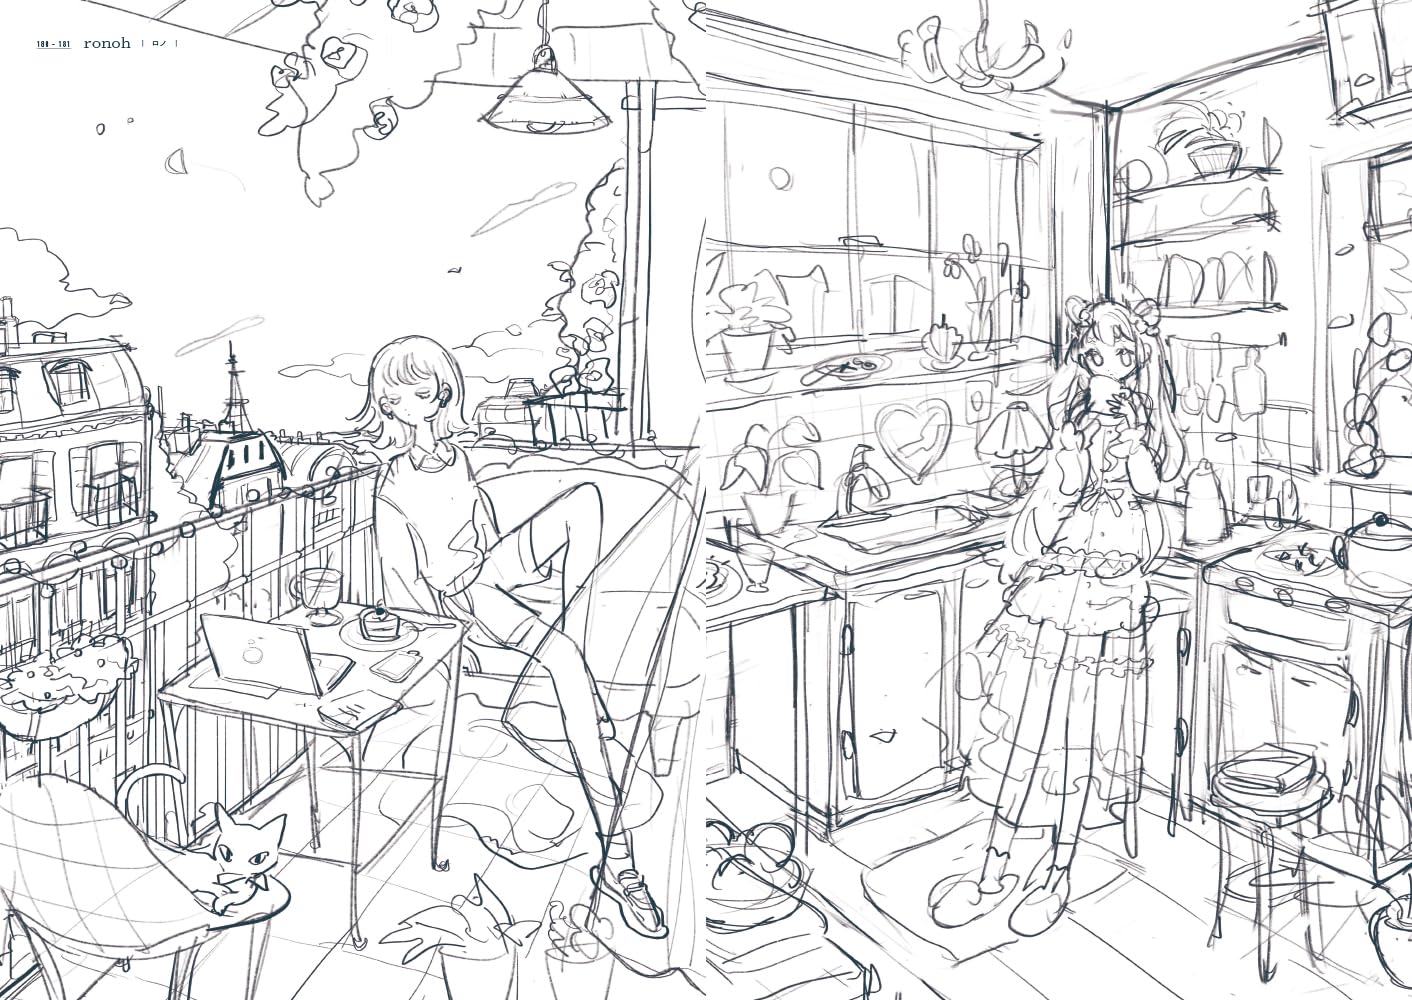 Rough Illustrations Before Coloring Artworks